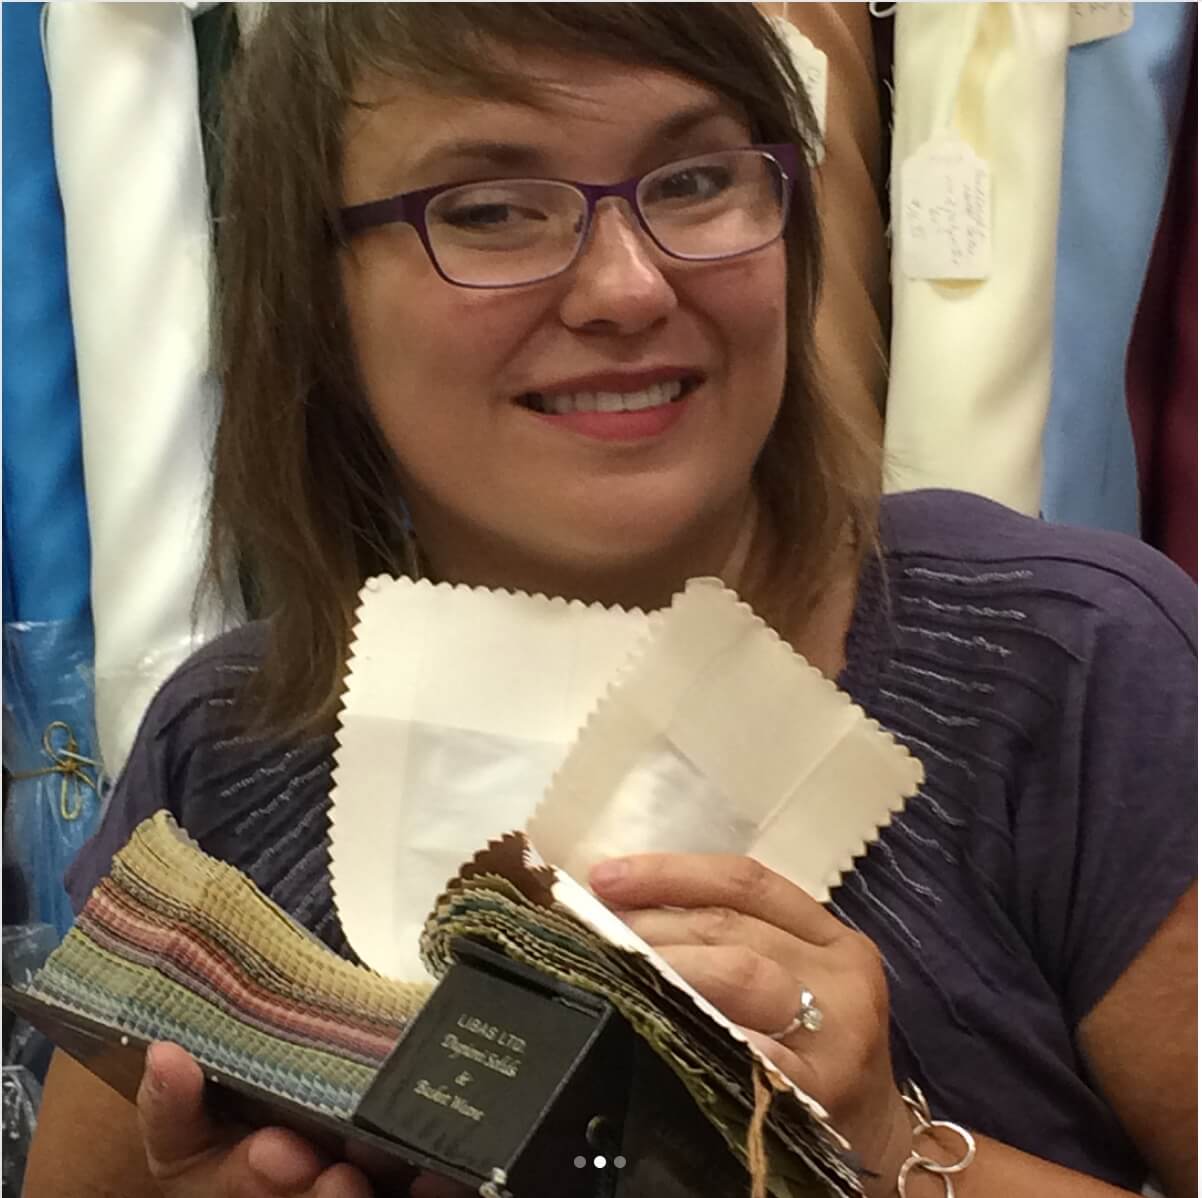 Choosing and Prepping Deborah's Fabrics by Brooks Ann Camper Bridal Couture